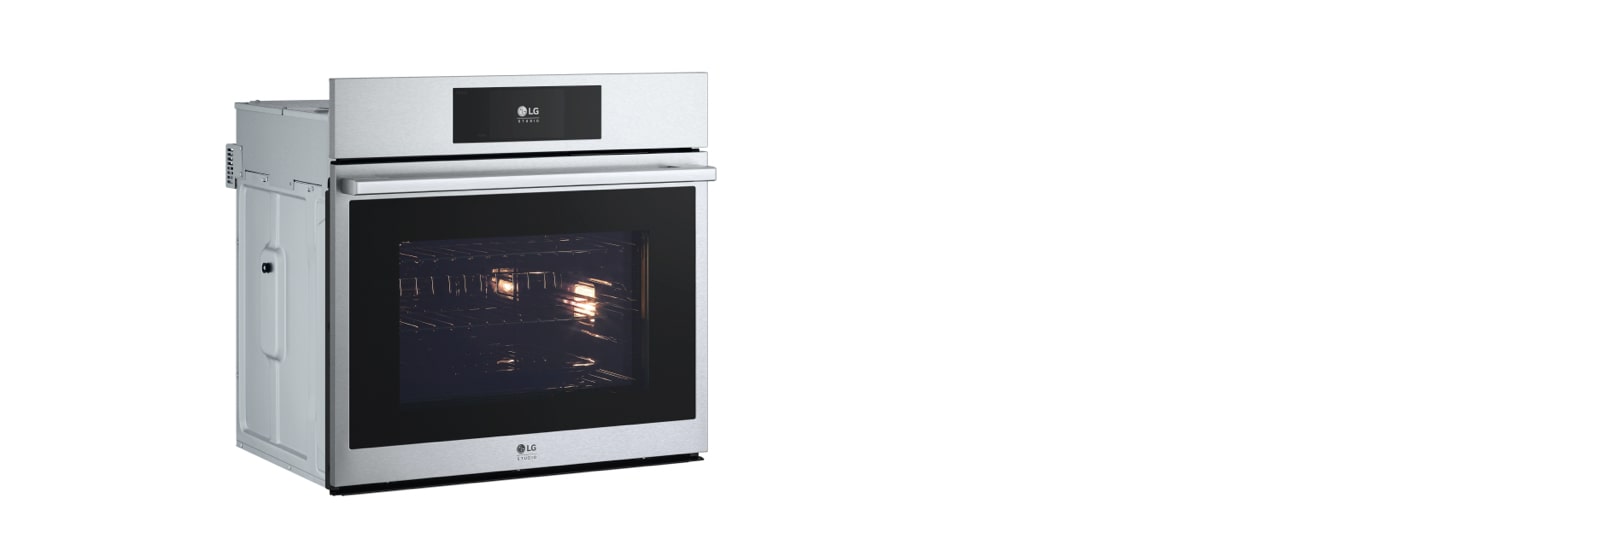 WSEP4727FLG Appliances 4.7 cu. ft. Smart Wall Oven with InstaView